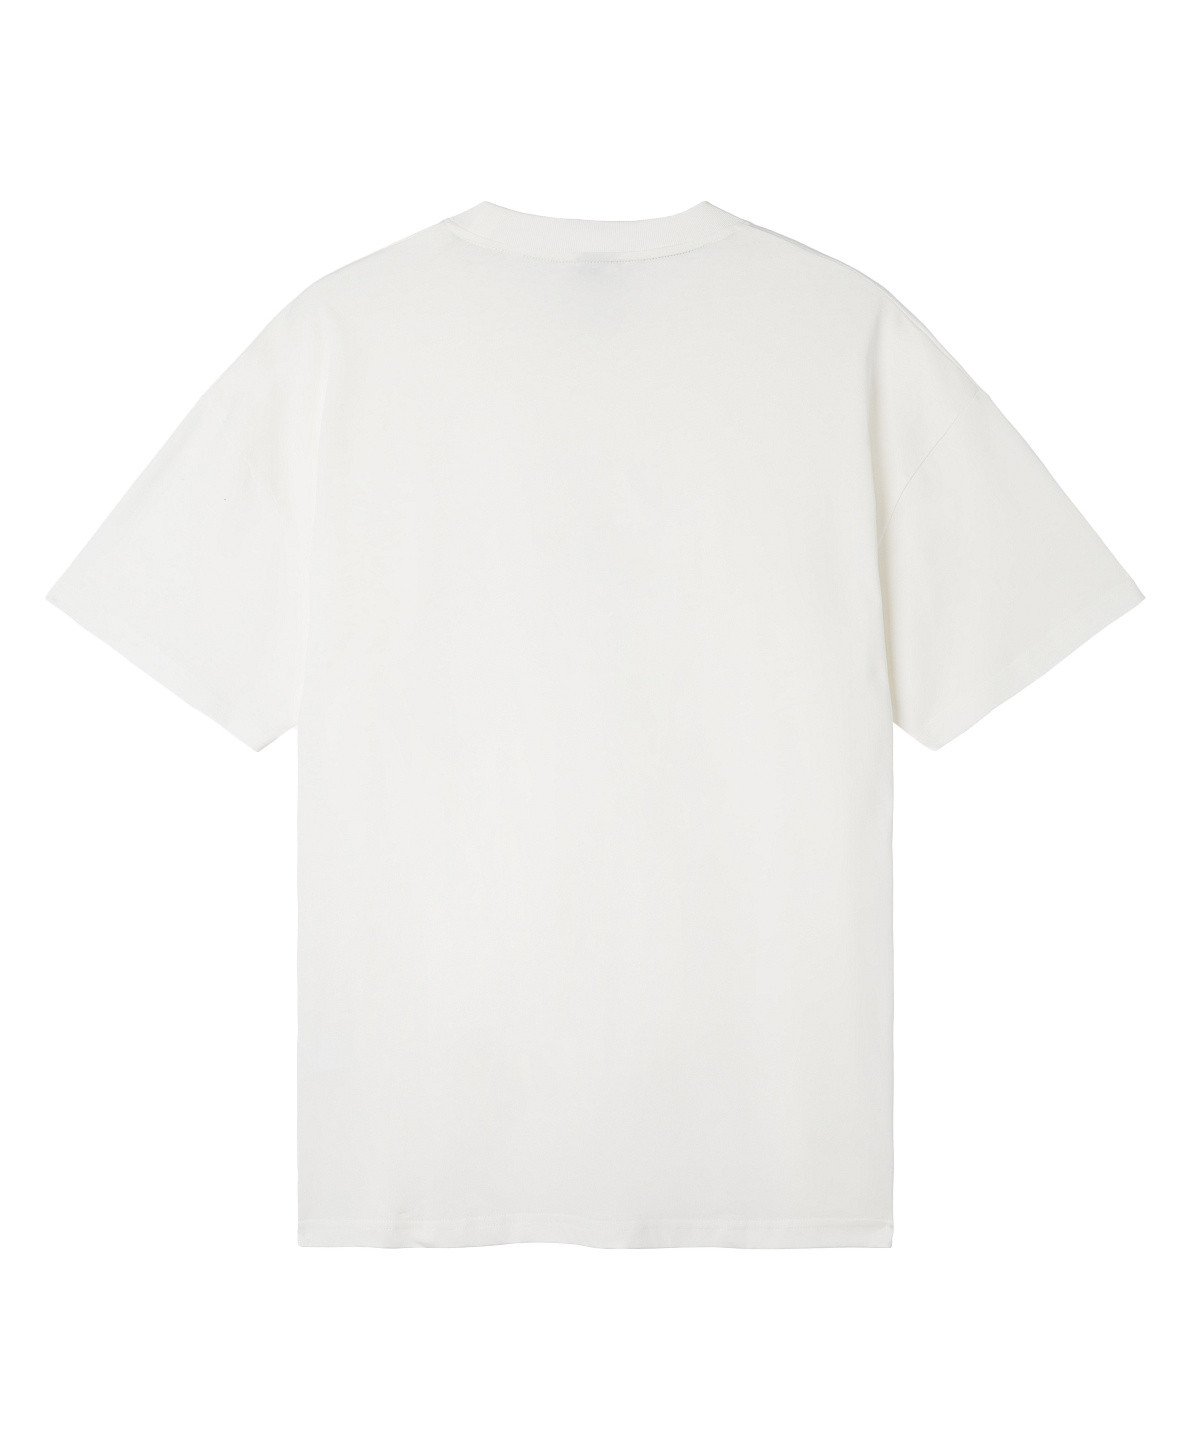 Funky - Crew-neck T-shirt with oval logo, White, large image number 1